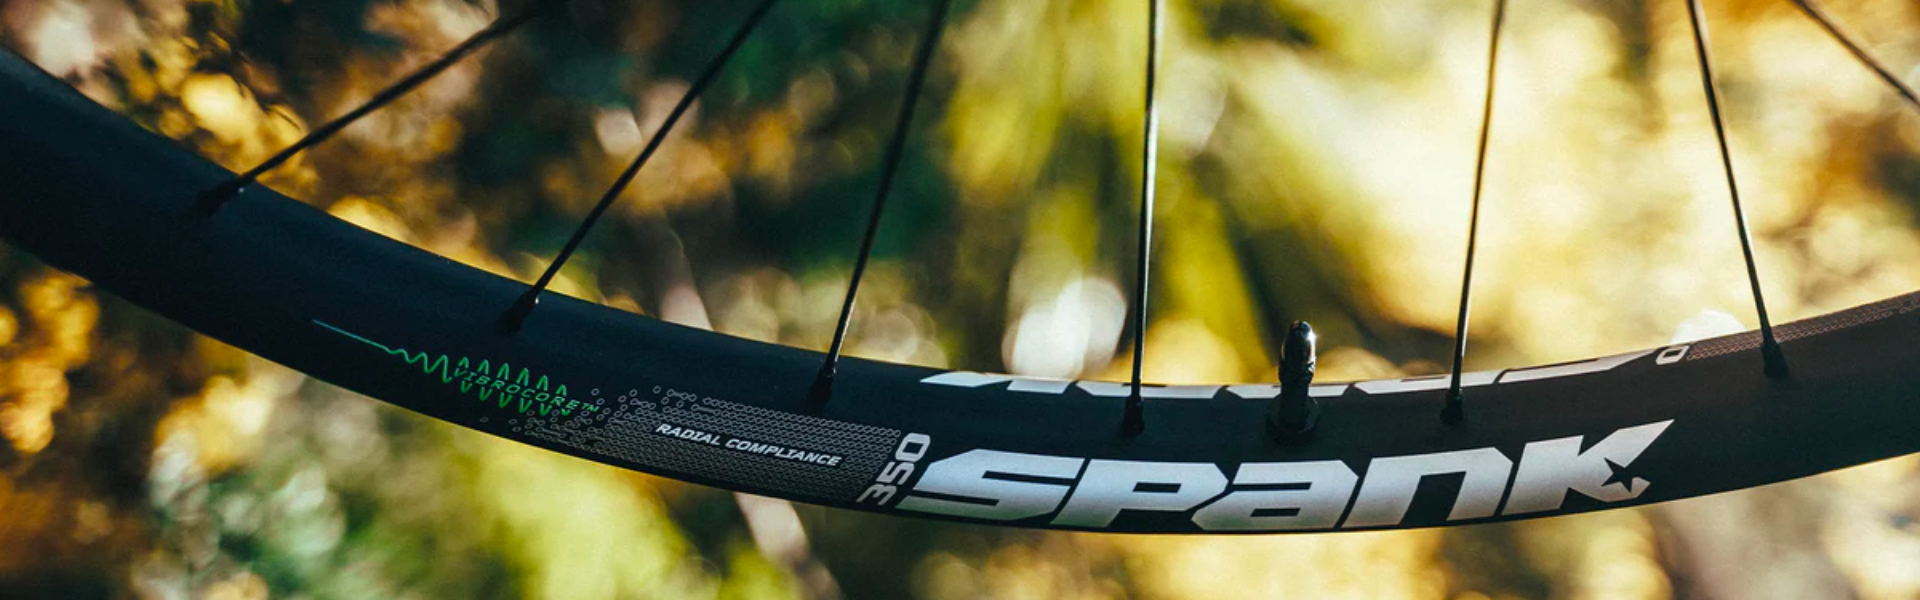 Shop the best bicycle wheels